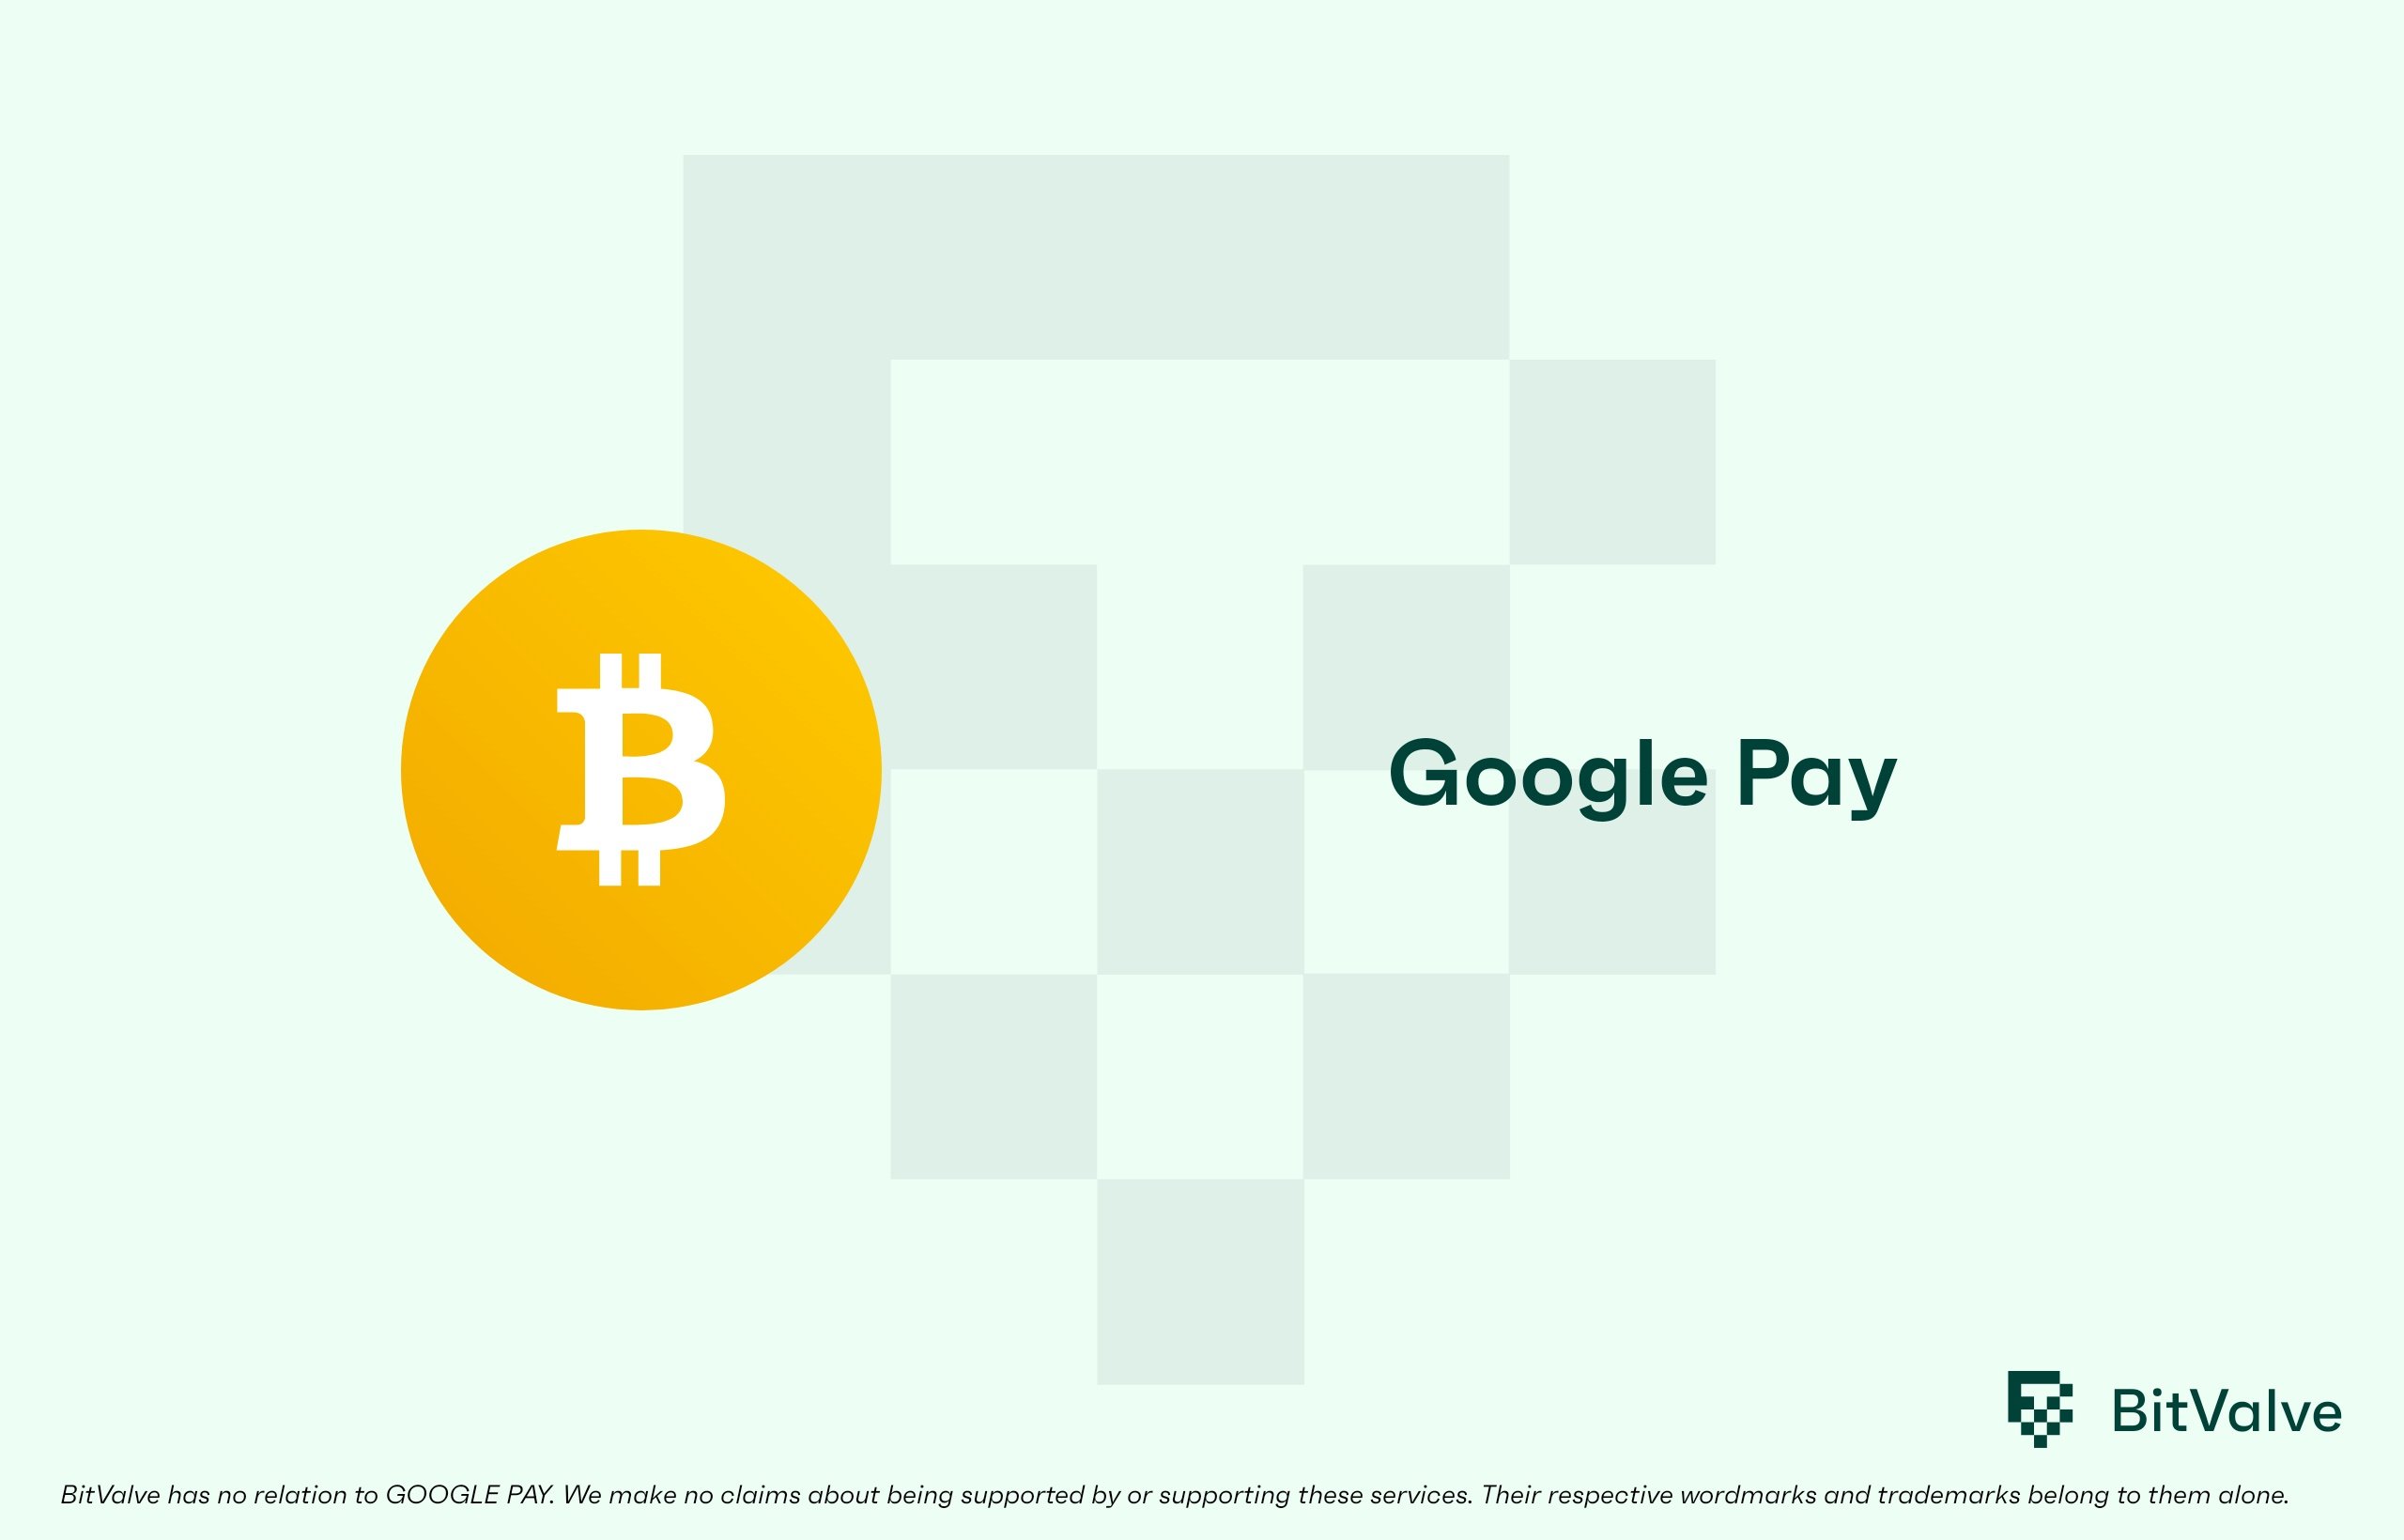 Where & How To Buy Bitcoin With Google Pay | Beginner’s Guide